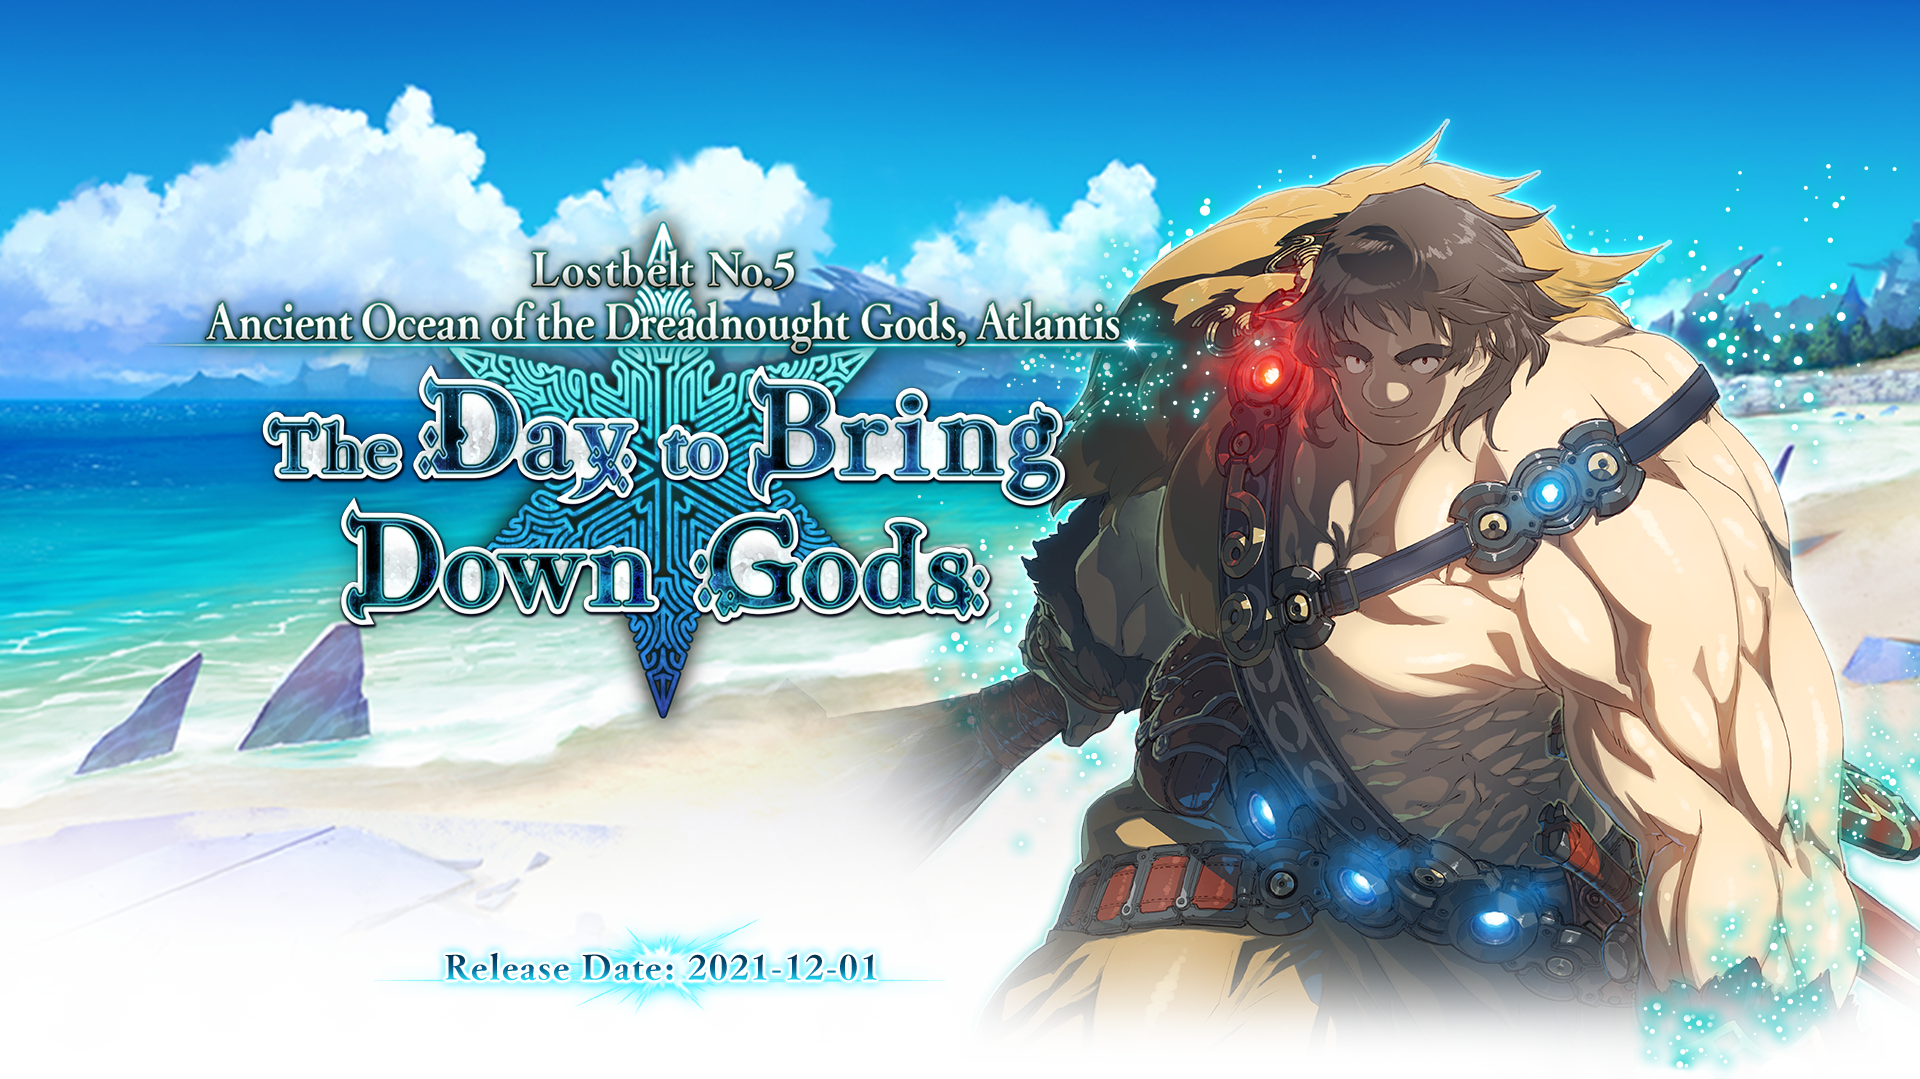 Lostbelt No.5 Ancient Ocean of the Dreadnought Gods, Atlantis - The Day to Bring Down Gods